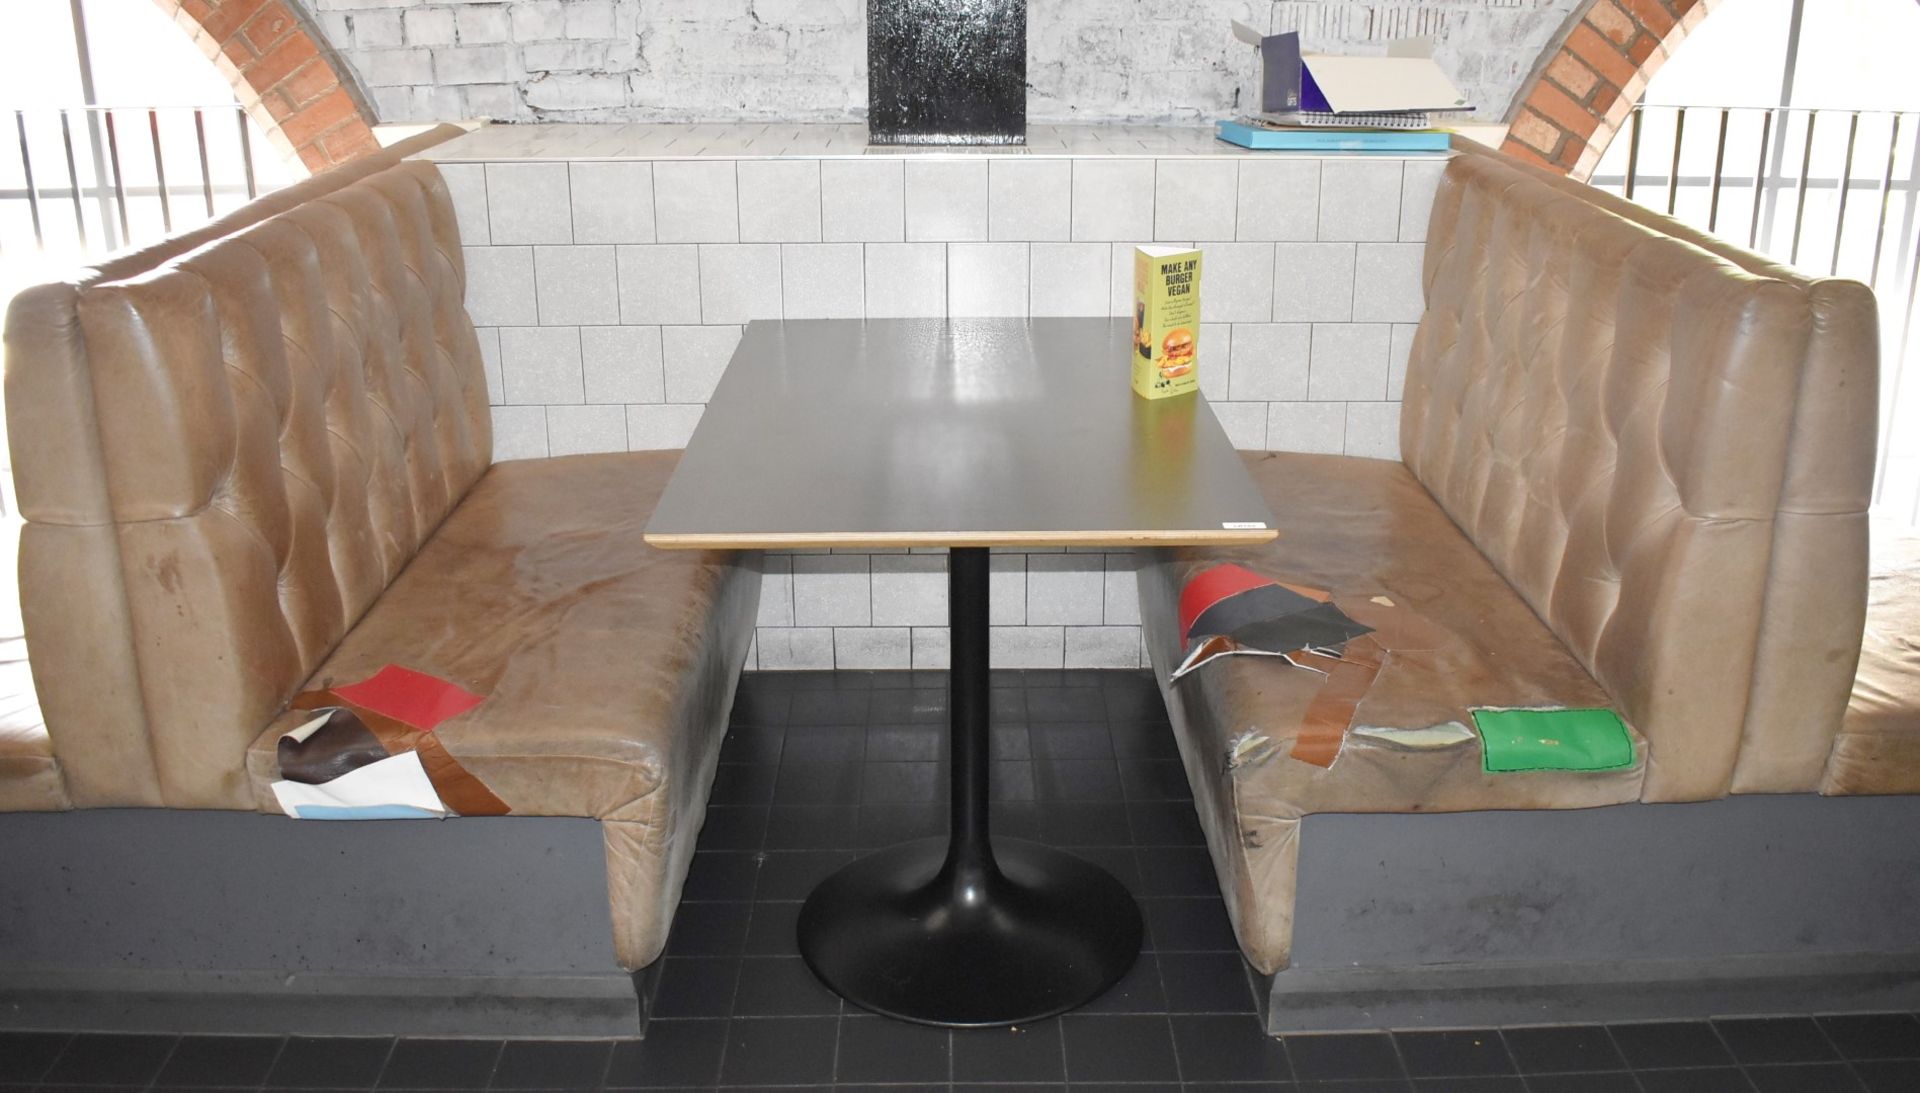 1 x Collection of Restaurant Seating Benches With Brown Leather Upholstery and Studded Backs - Image 5 of 26